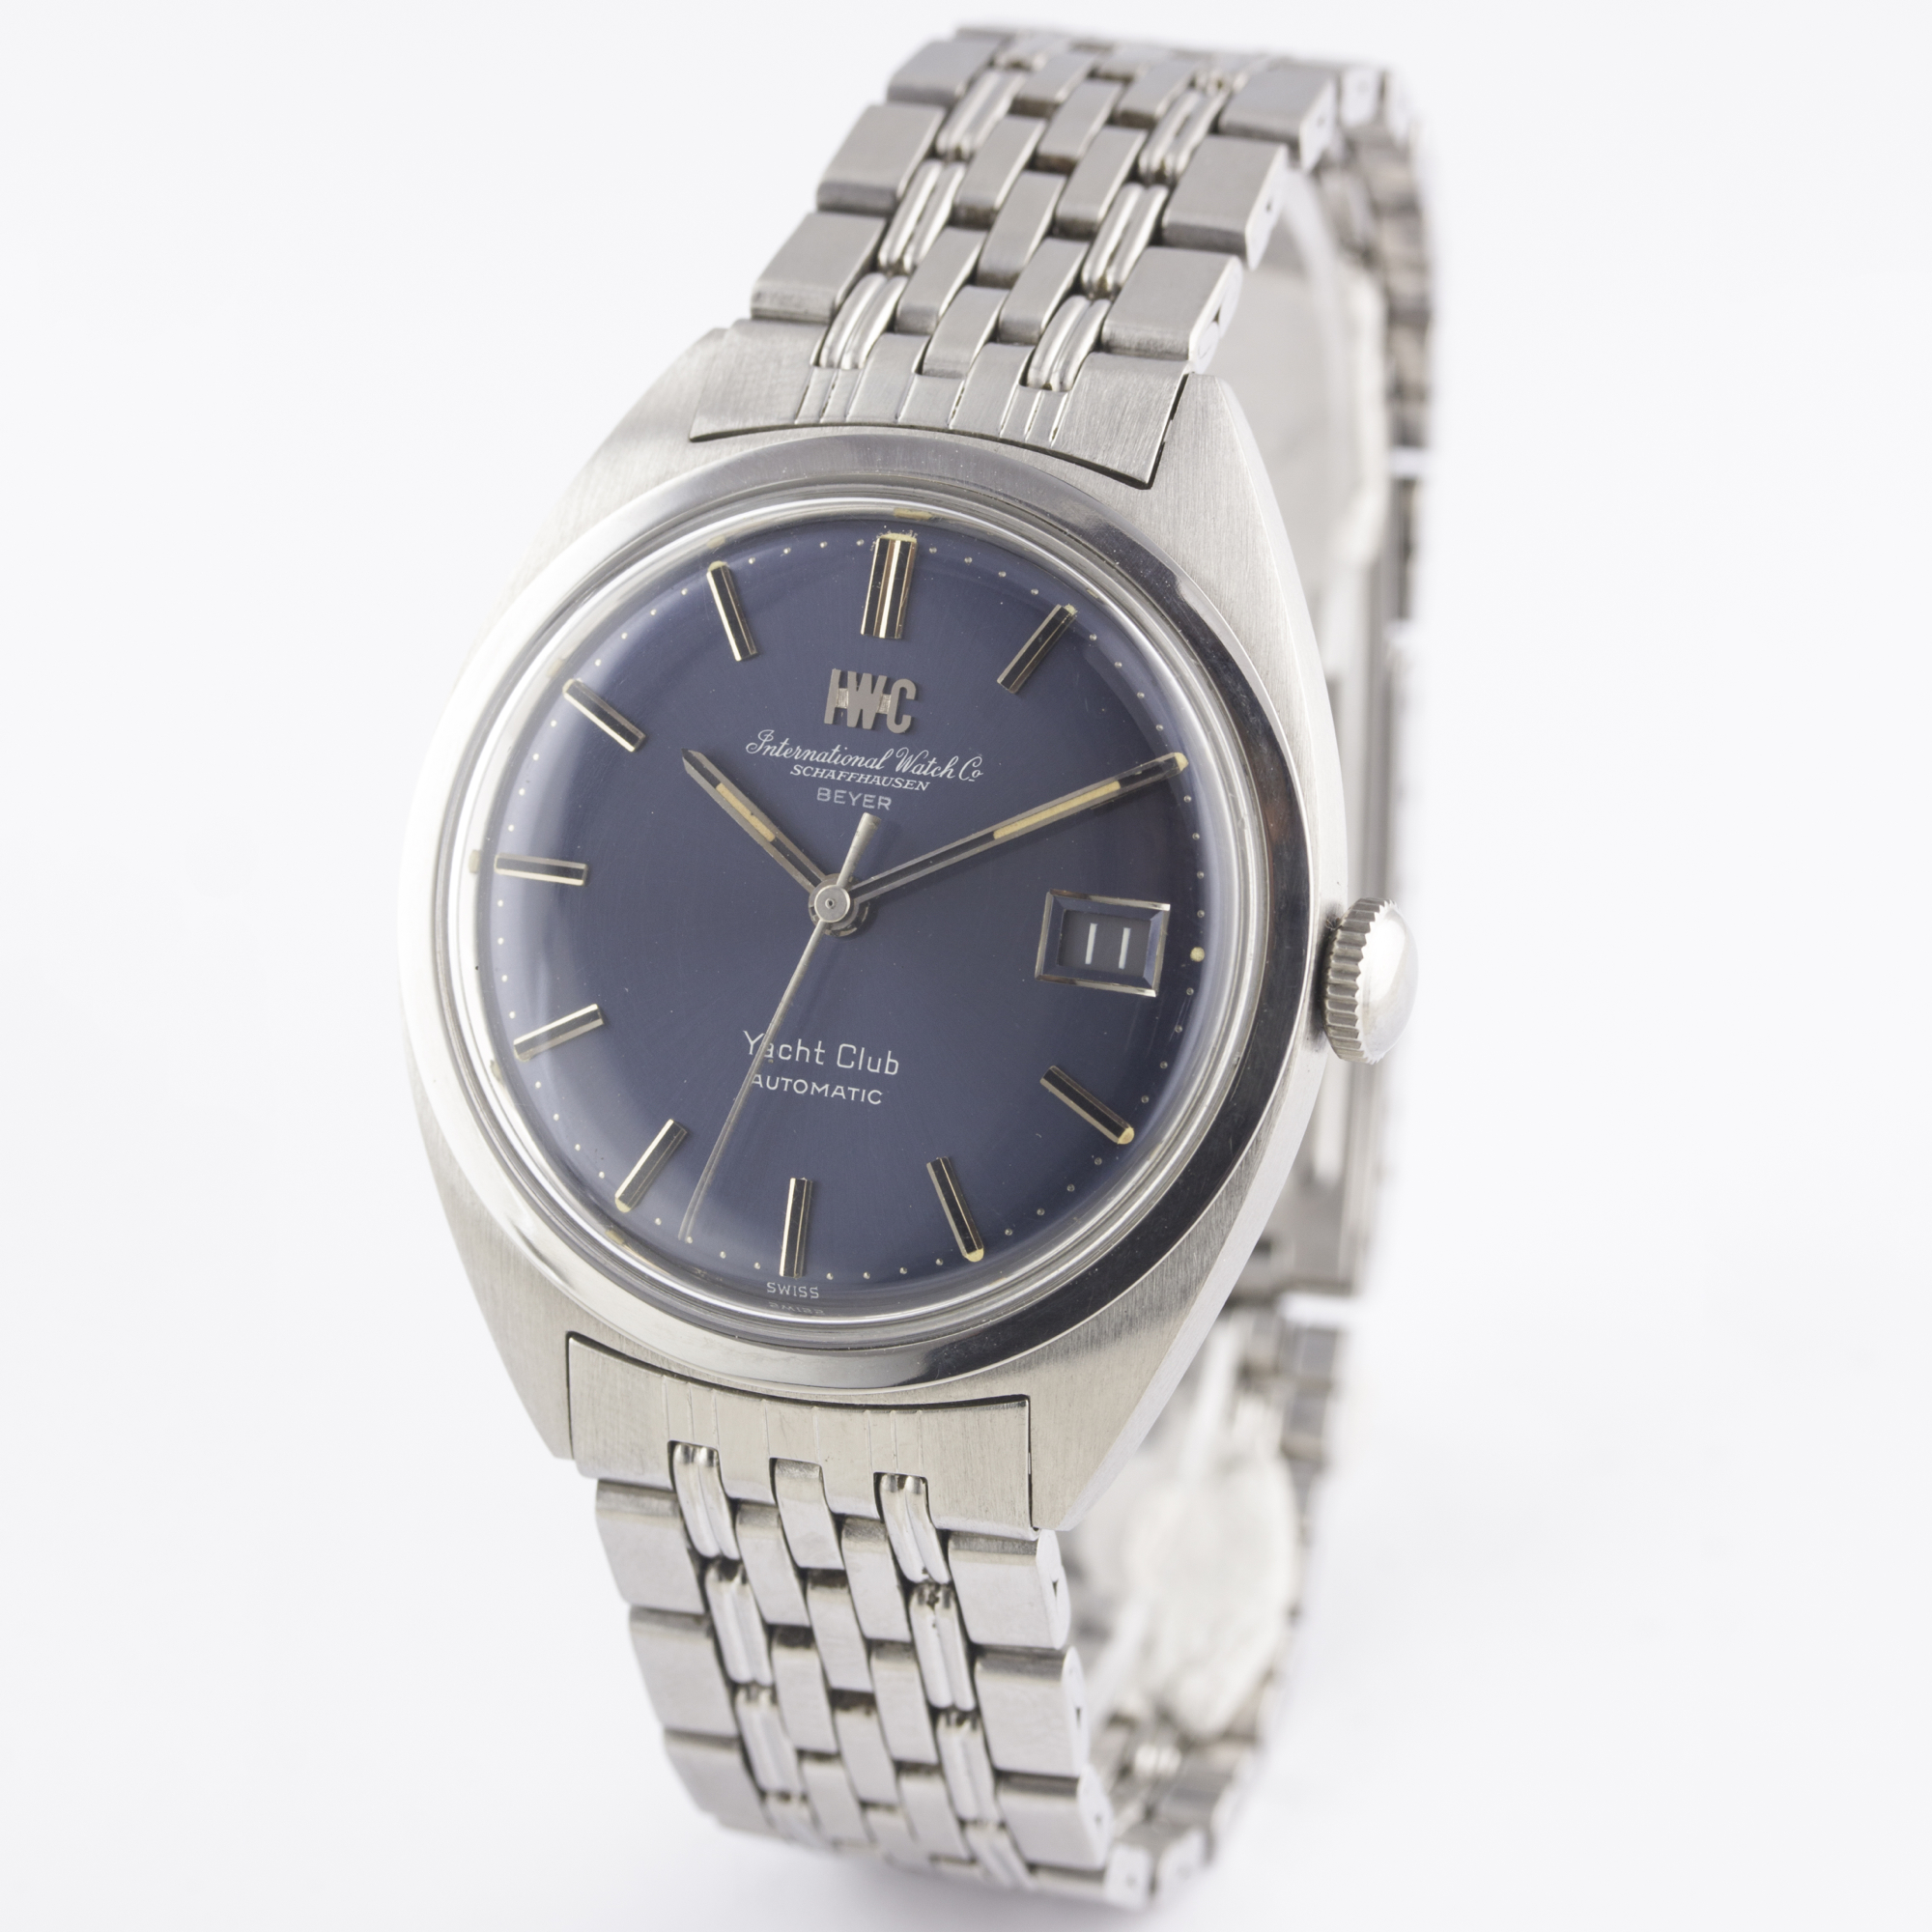 A RARE GENTLEMAN'S STAINLESS STEEL IWC YACHT CLUB AUTOMATIC BRACELET WATCH CIRCA 1971, REF. R811 - Image 4 of 11